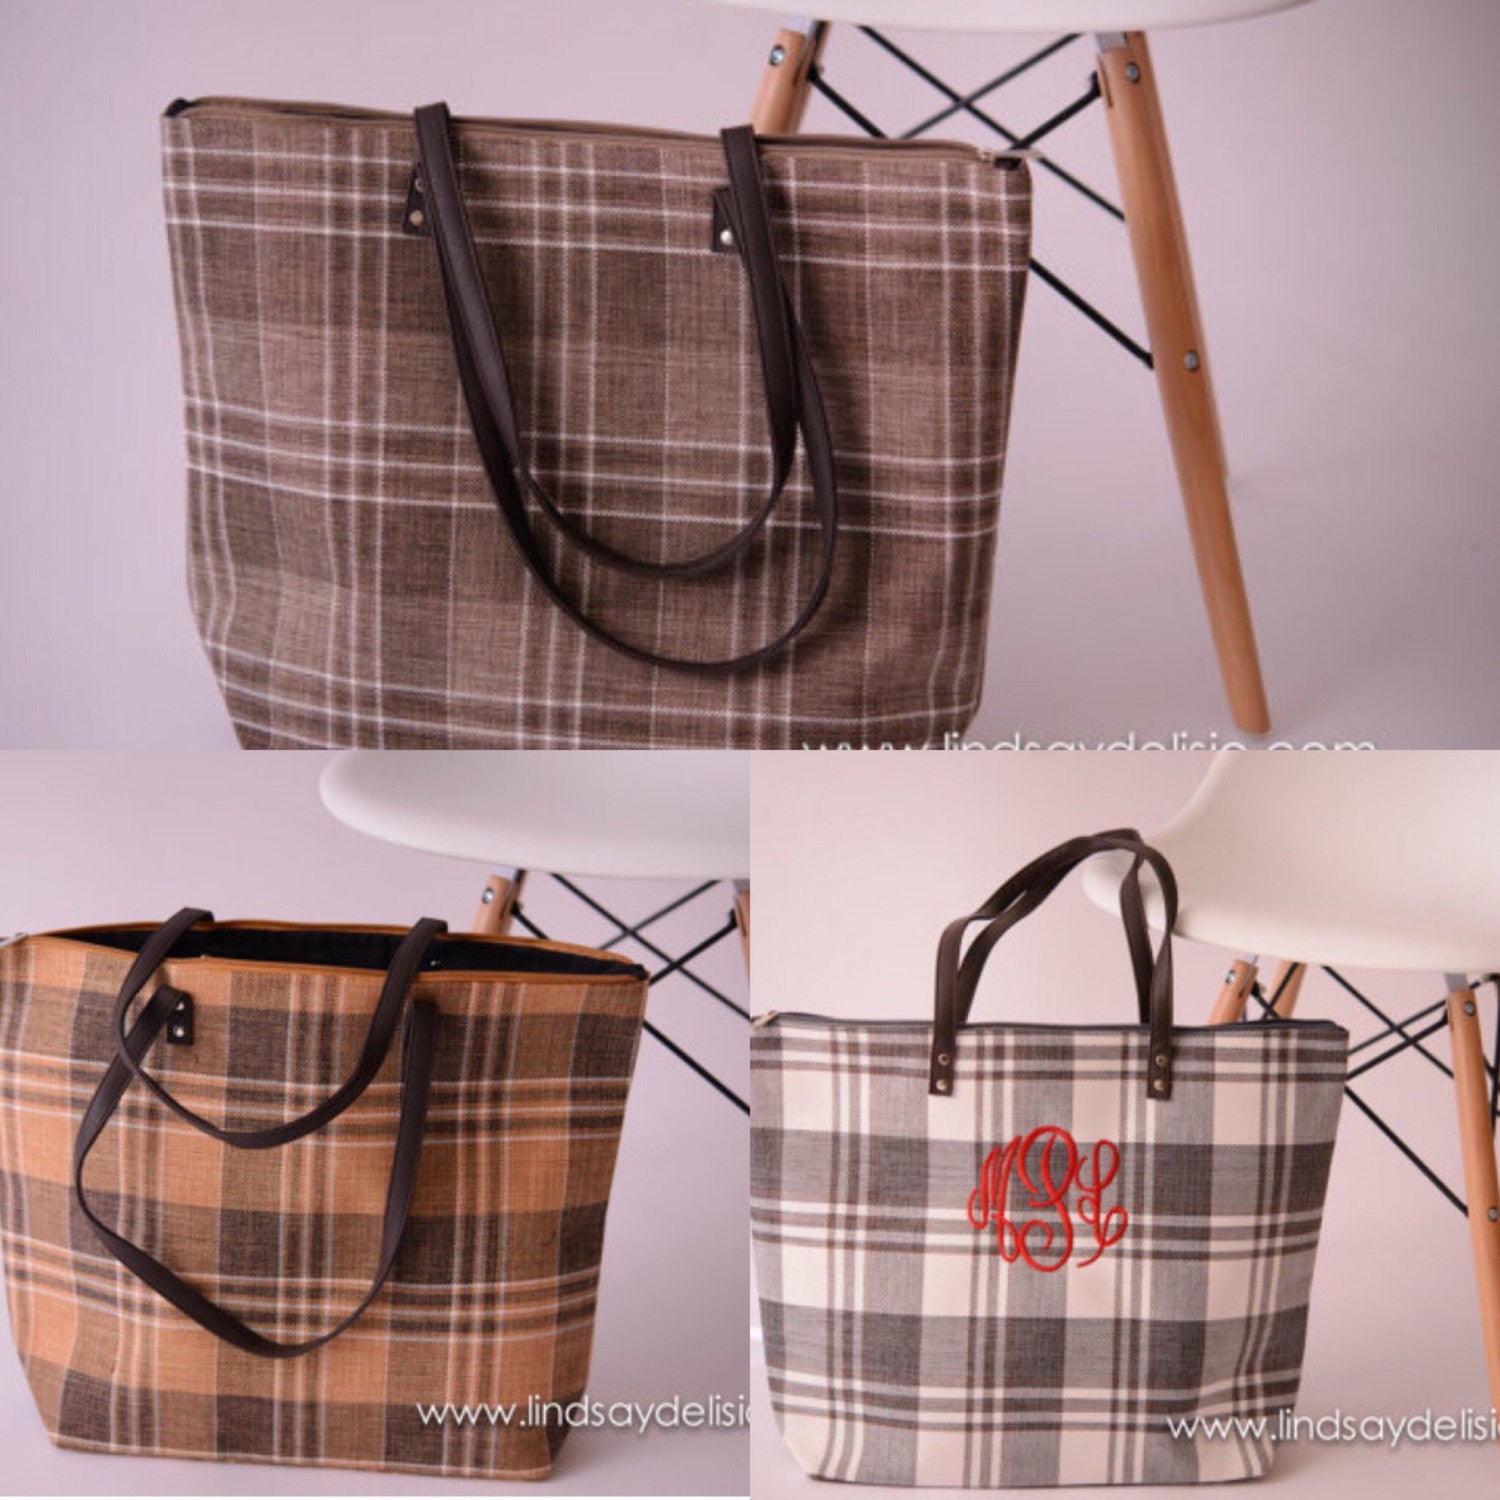 Plaid Purse for Fall -- Monogrammed Bag with Faux Leather Handles